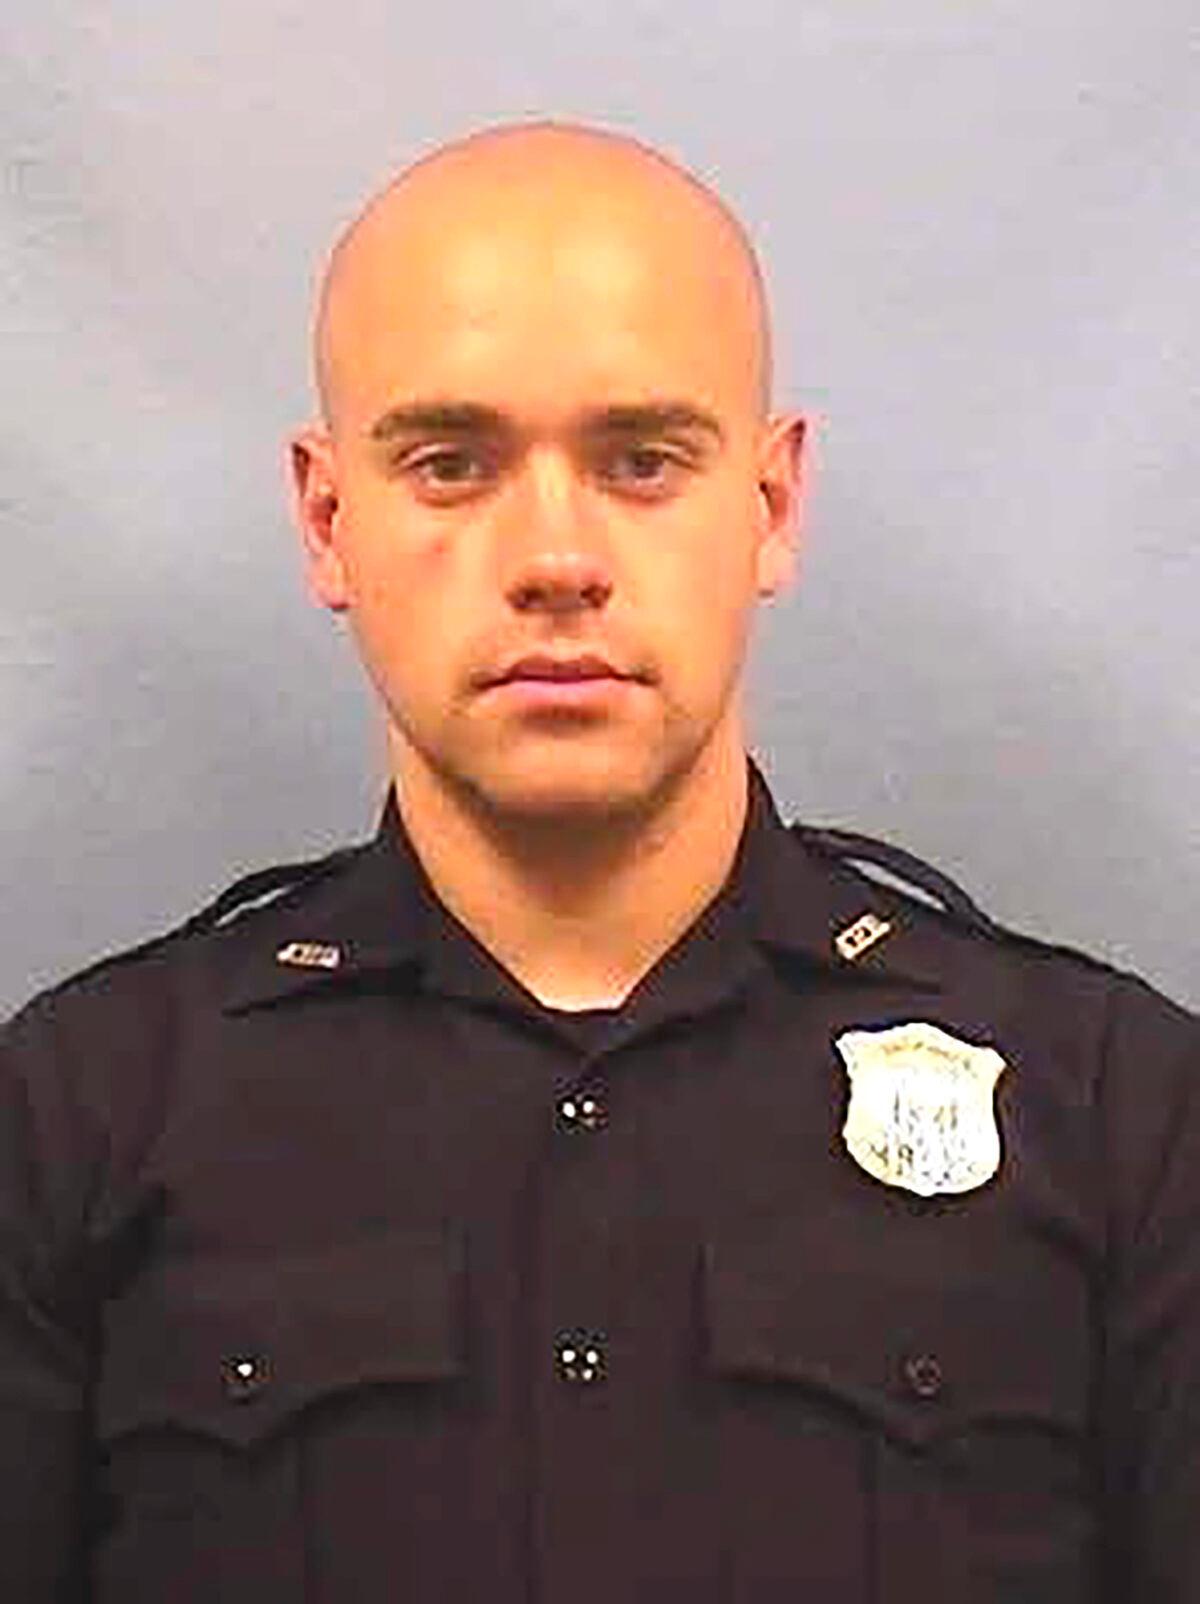 Former Atlanta Police Department officer Garrett Rolfe, who was fired after the shooting death of 27-year-old Rayshard Brooks, in an undated photograph released in Atlanta, Ga., June 14, 2020. (Atlanta Police Department via Reuters)